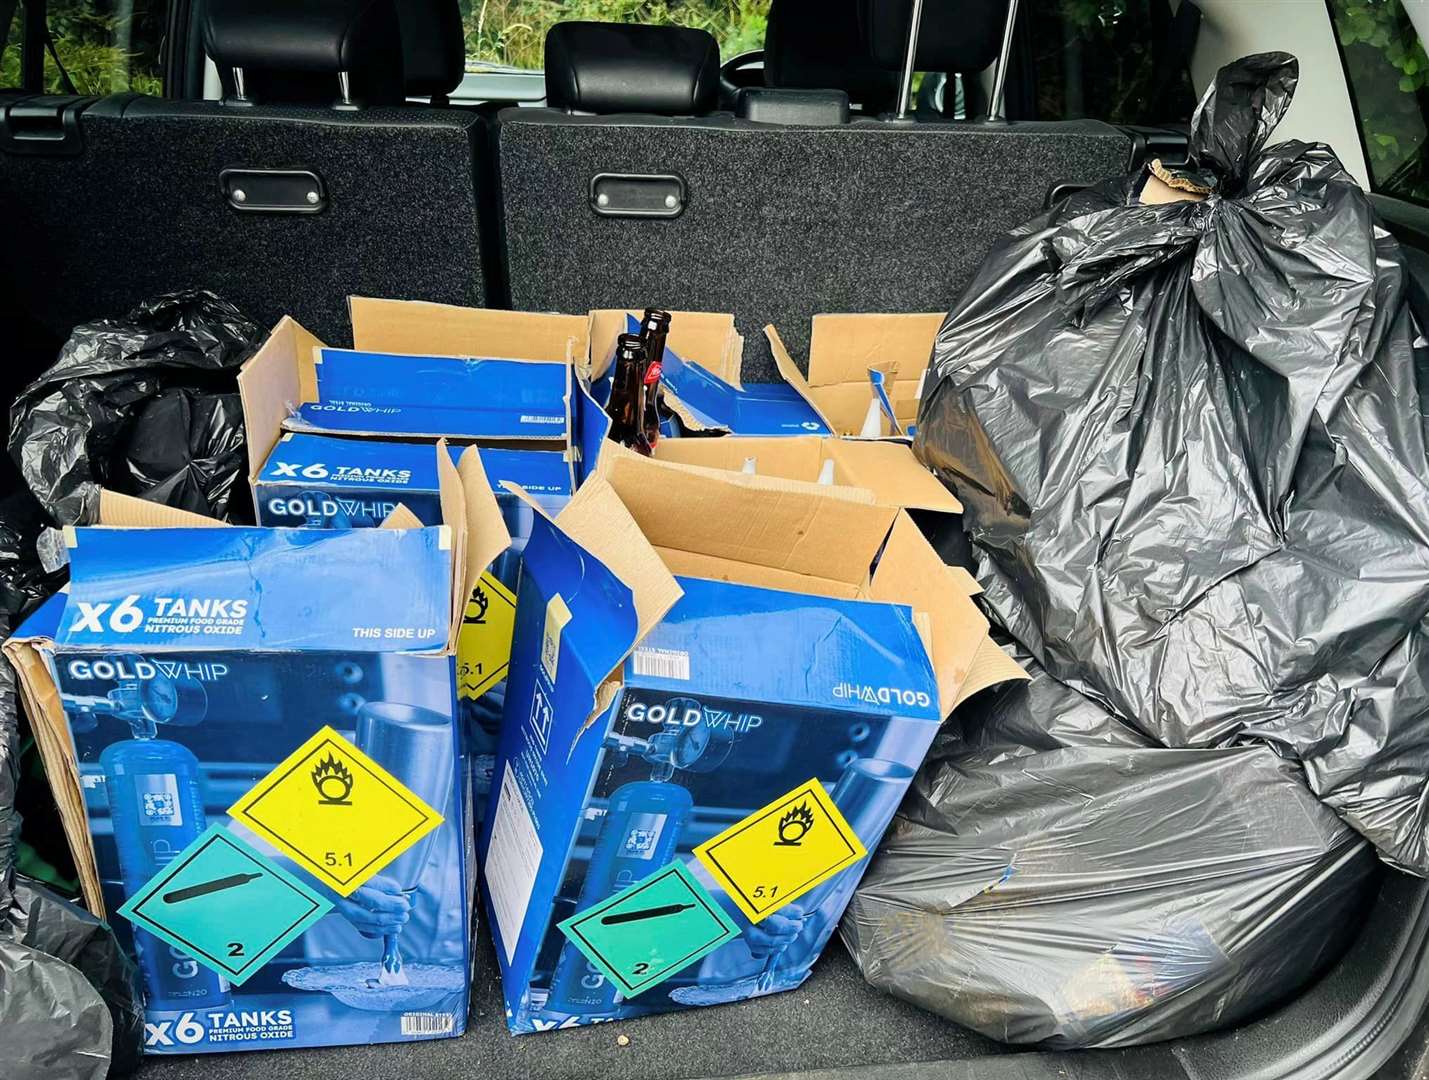 A bootload full of canisters and rubbish. Photo: Ash & New Ash Green Councillors